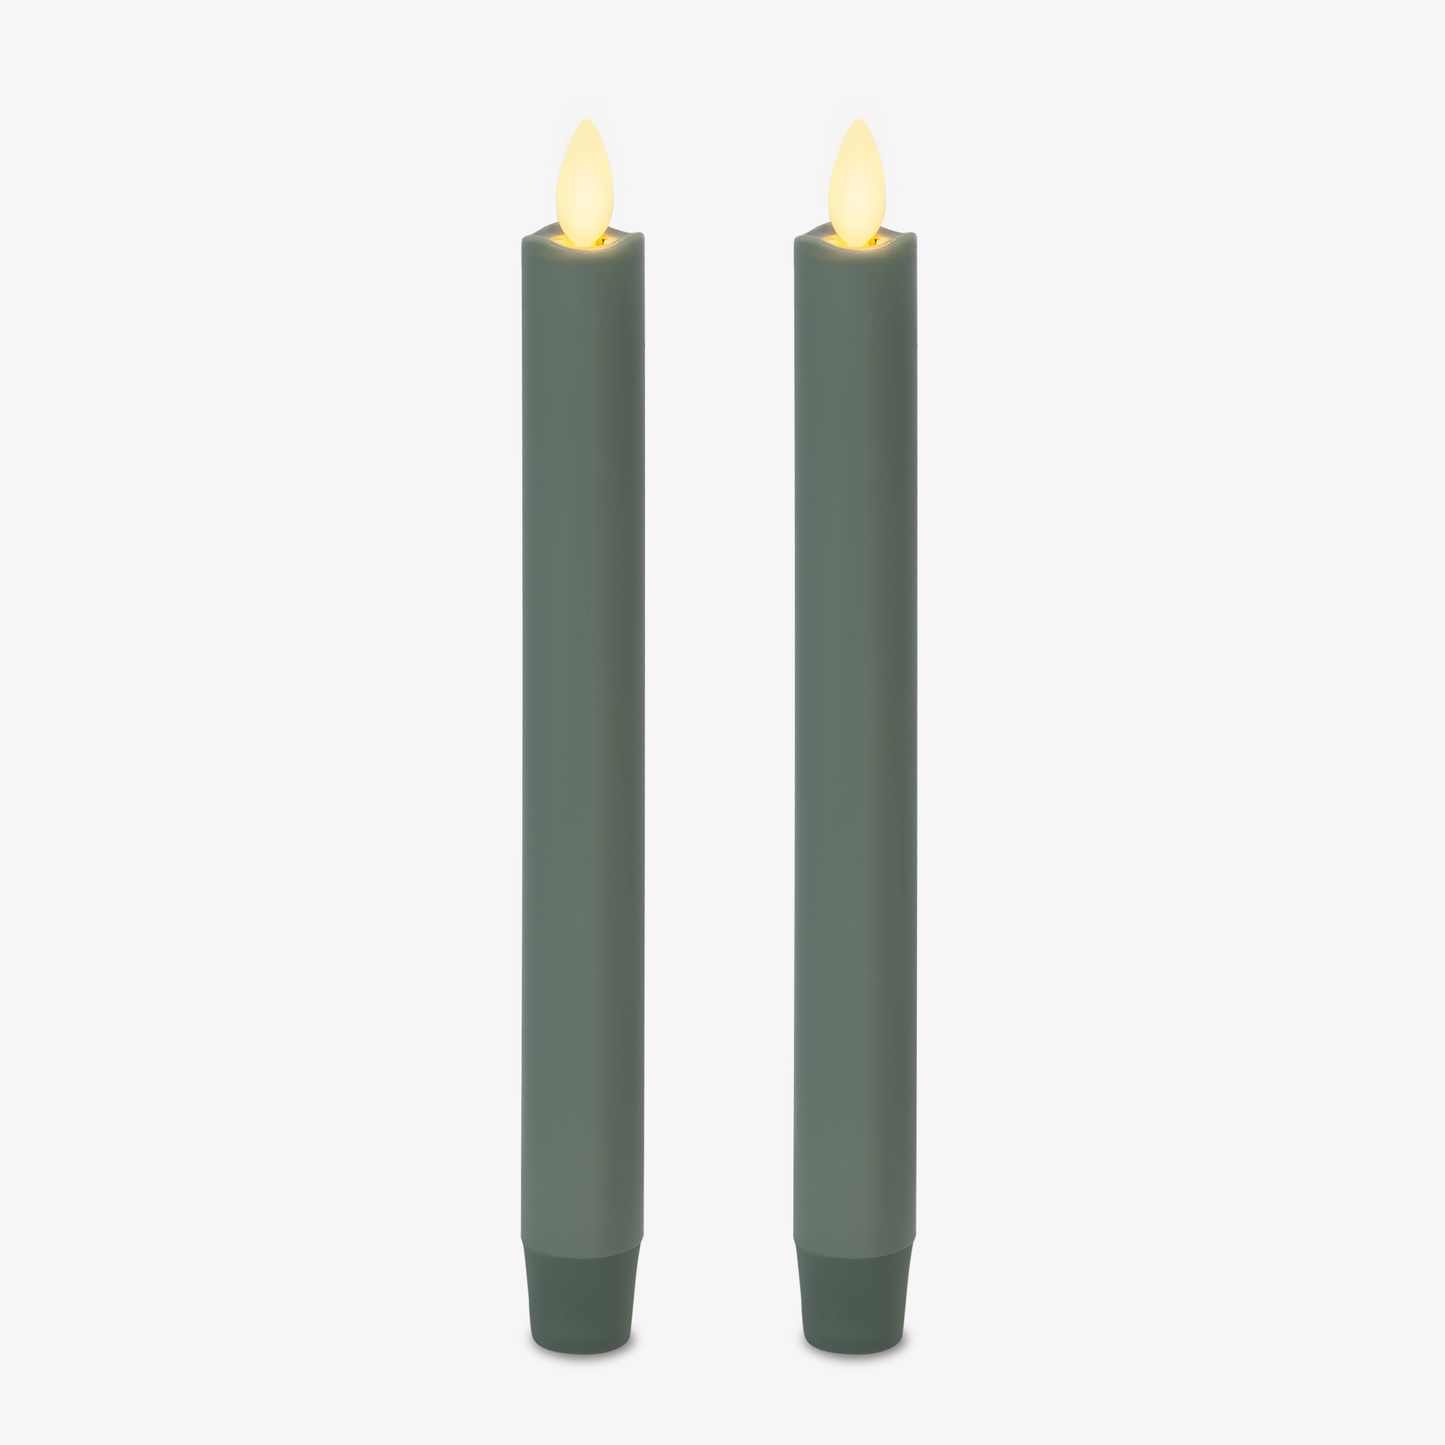 Iceberg Green Flameless Candle Tapers - Melted Top - 9.75" Height - Set of 2